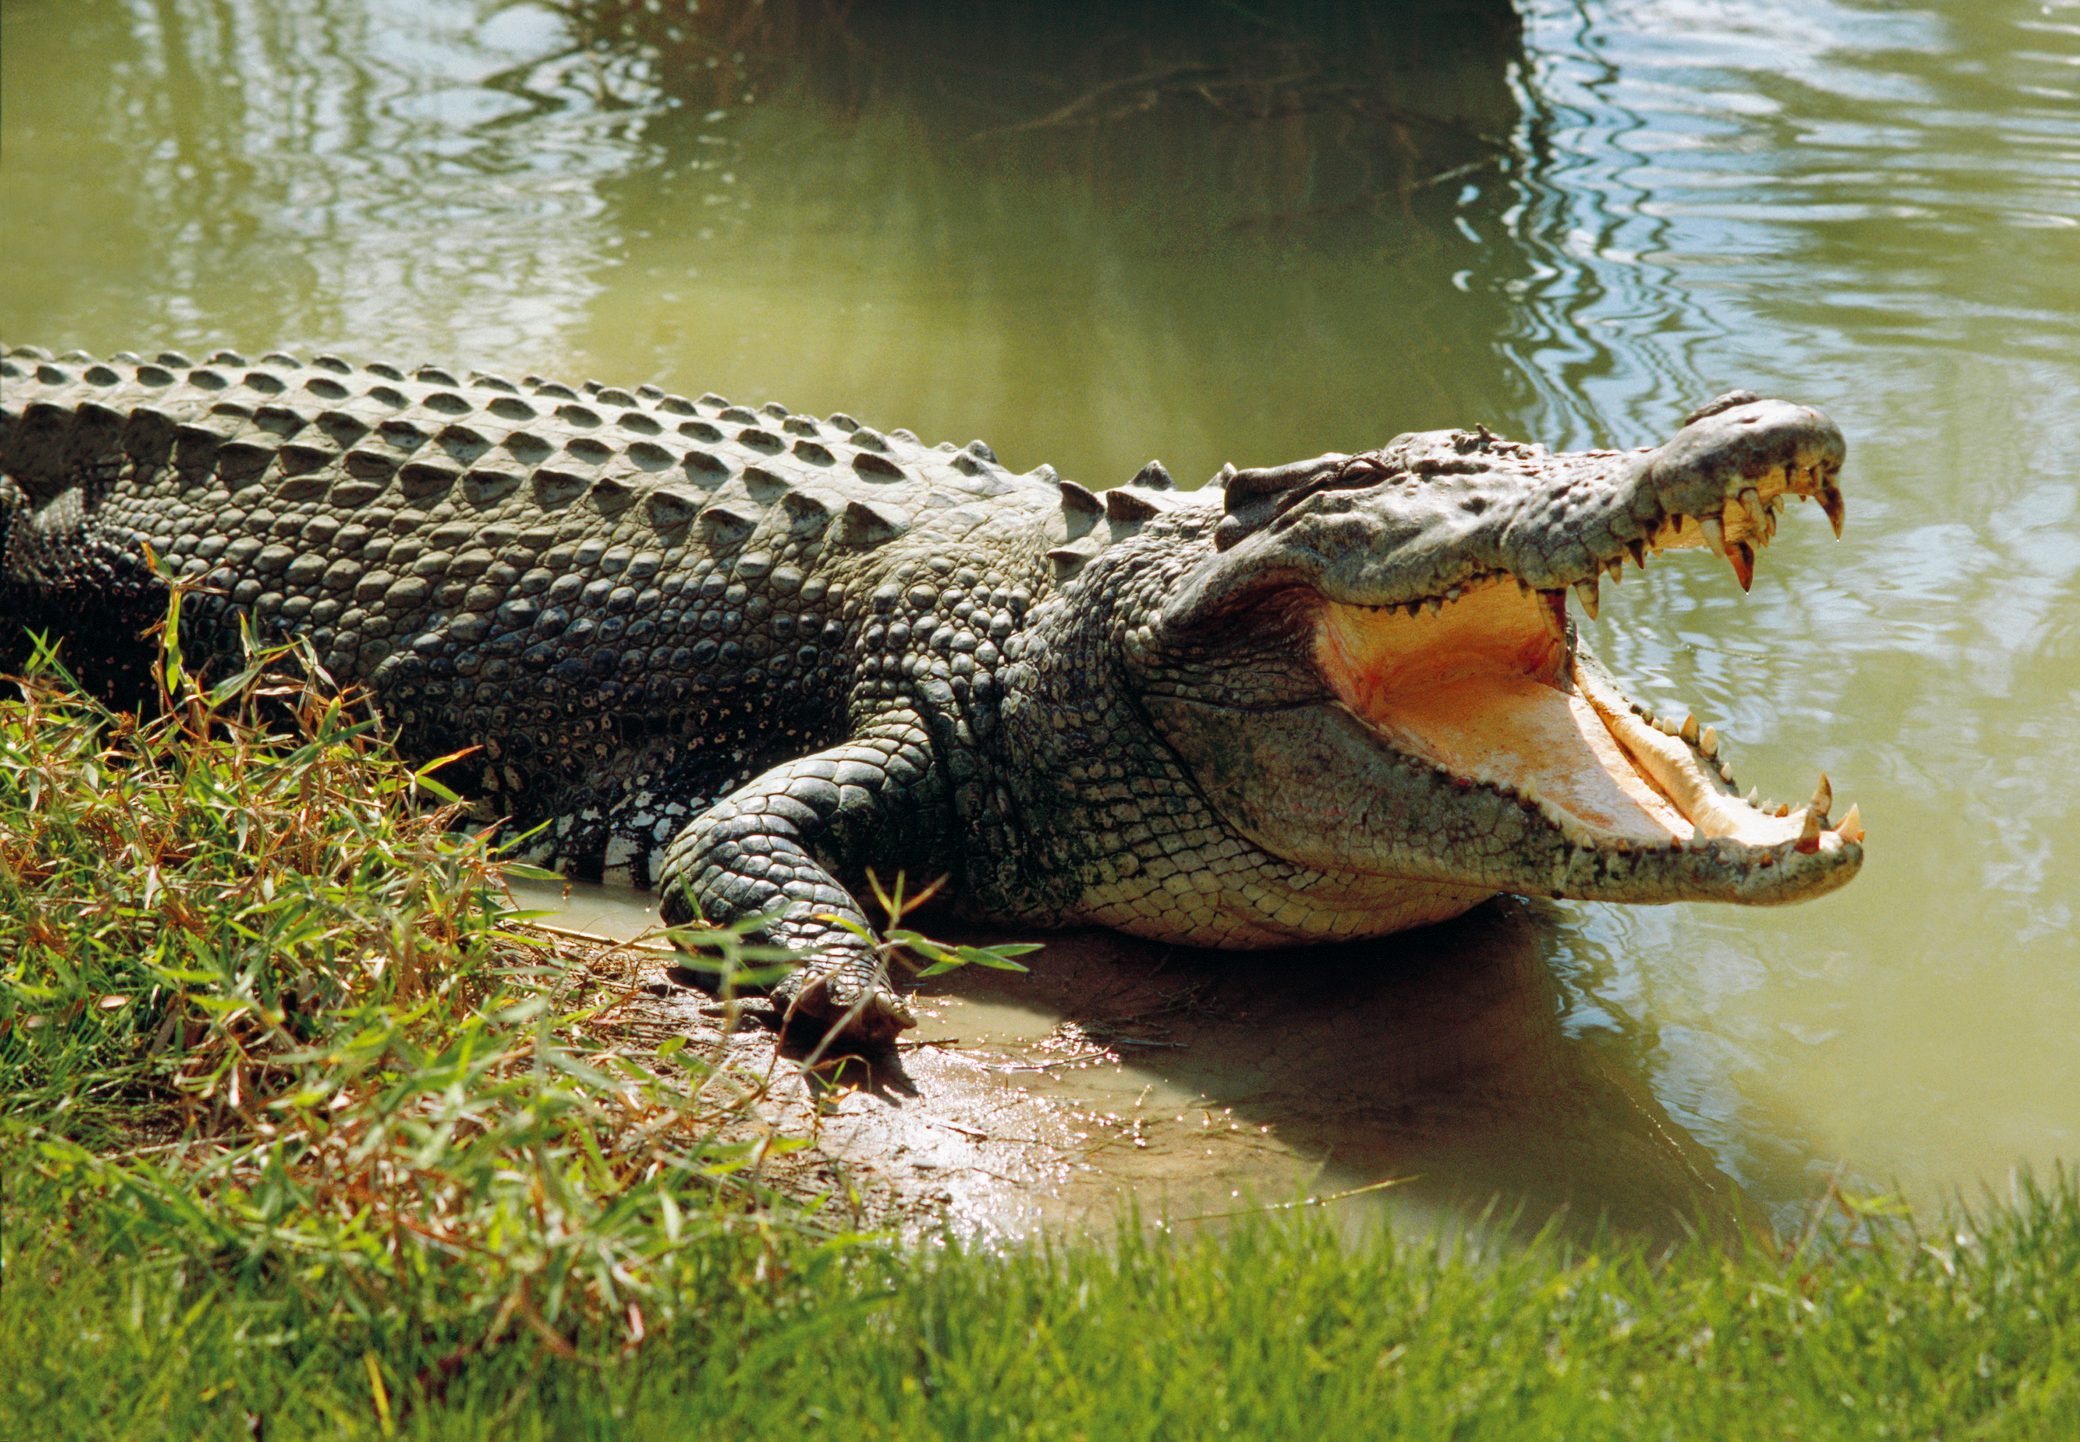 Man Killed by Crocodile While Fishing in River in BhadraK 